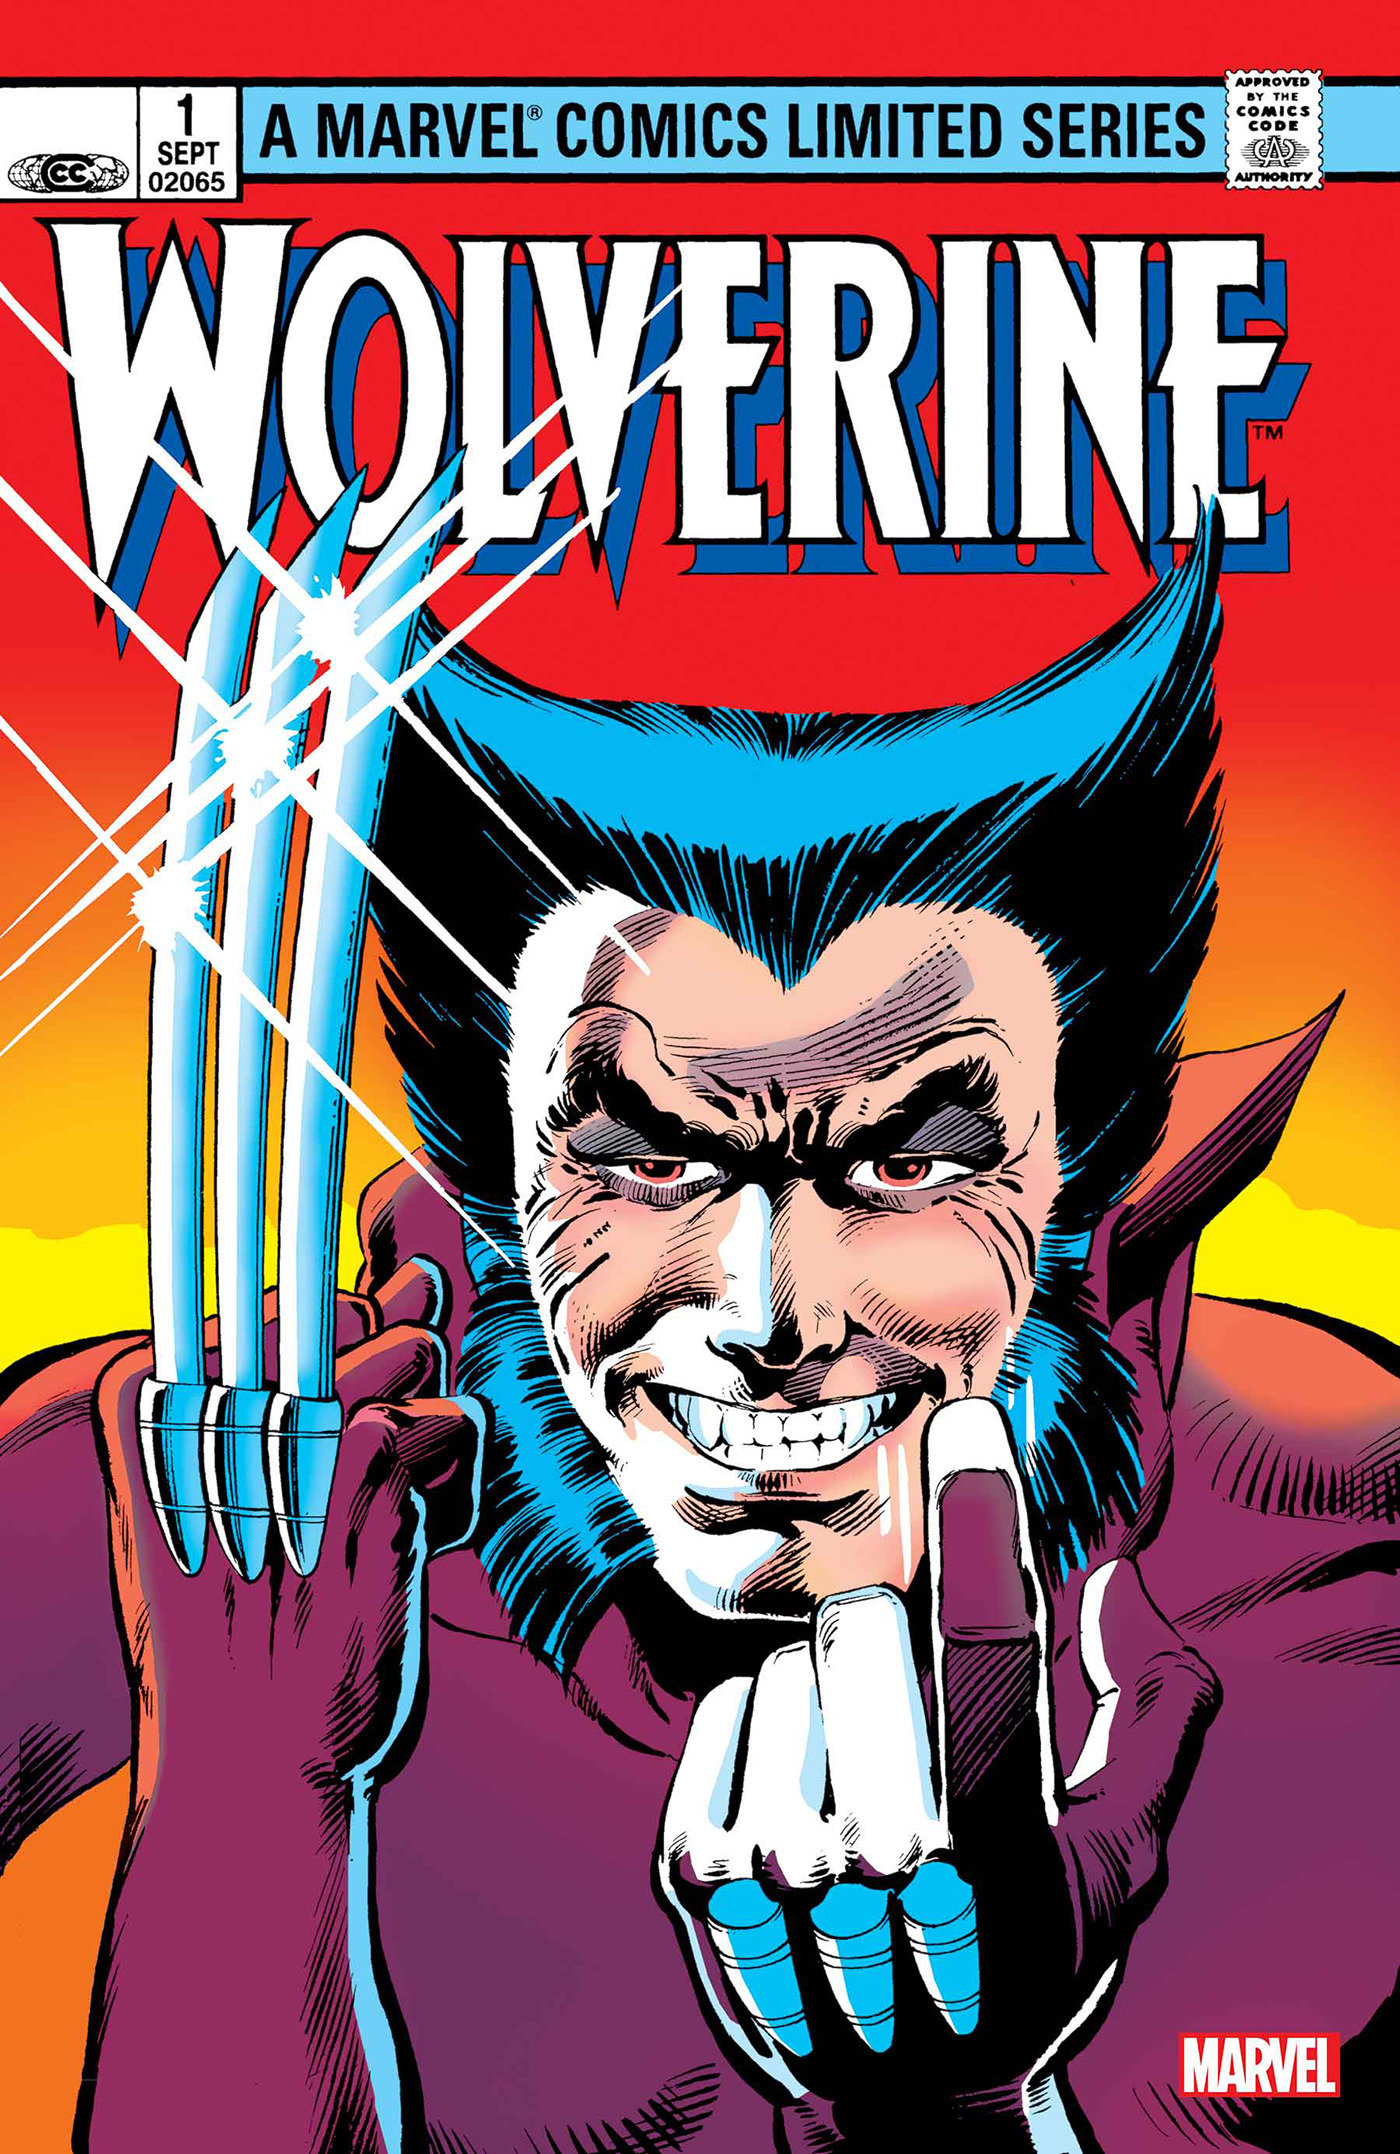 Wolverine by Claremont & Miller #1 Facsimile Edition Foil Variant (2023 Printing)